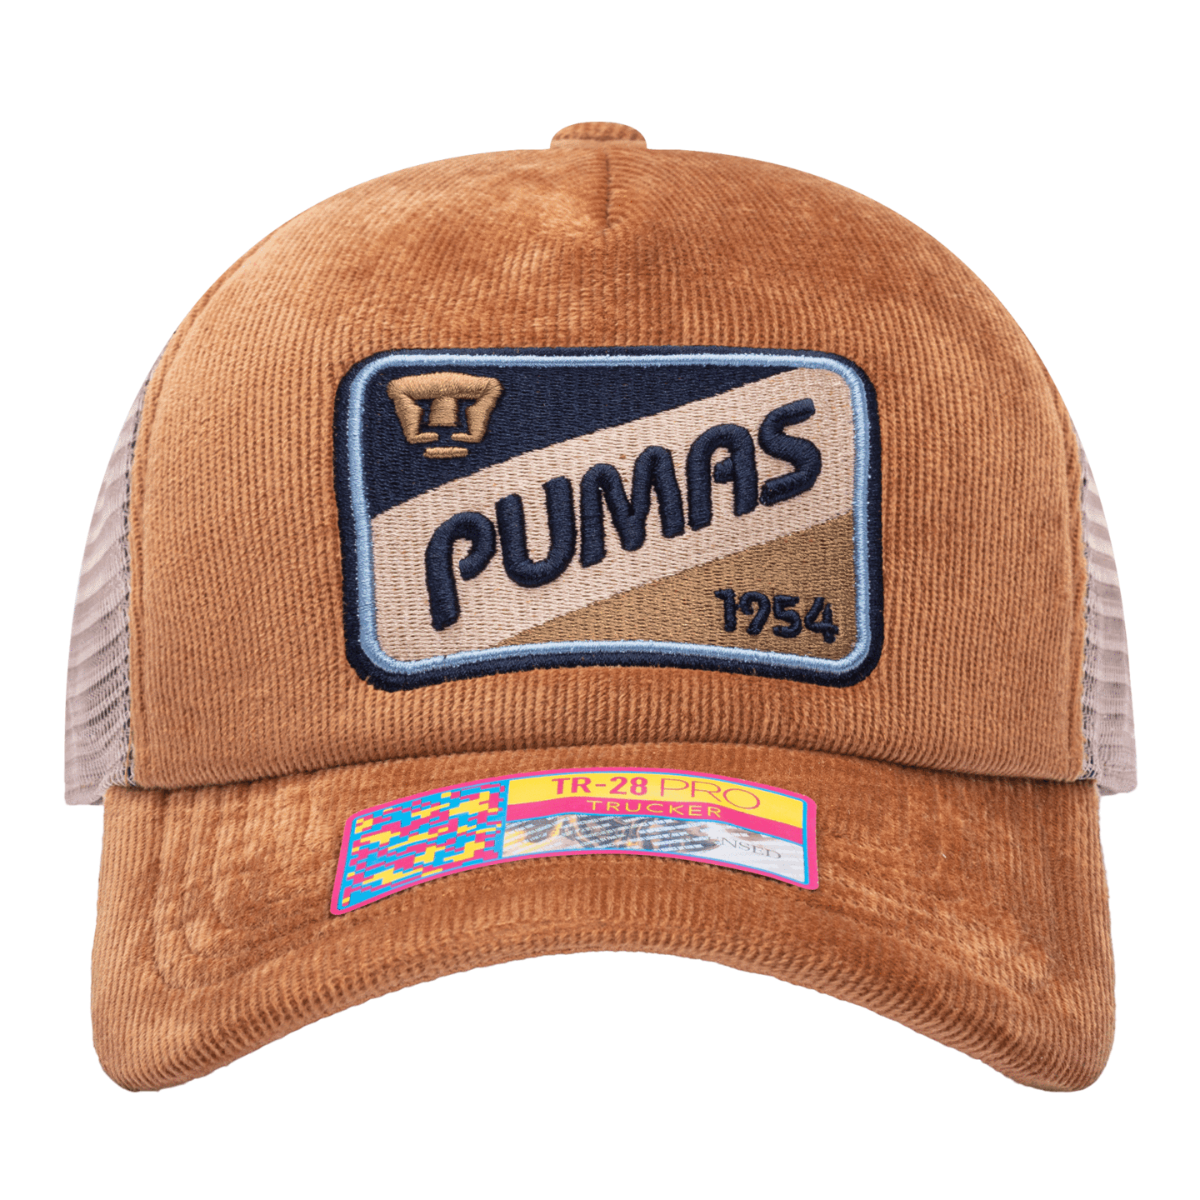 FI Collection Pumas Camionero Trucker Hat - Brown (Front)